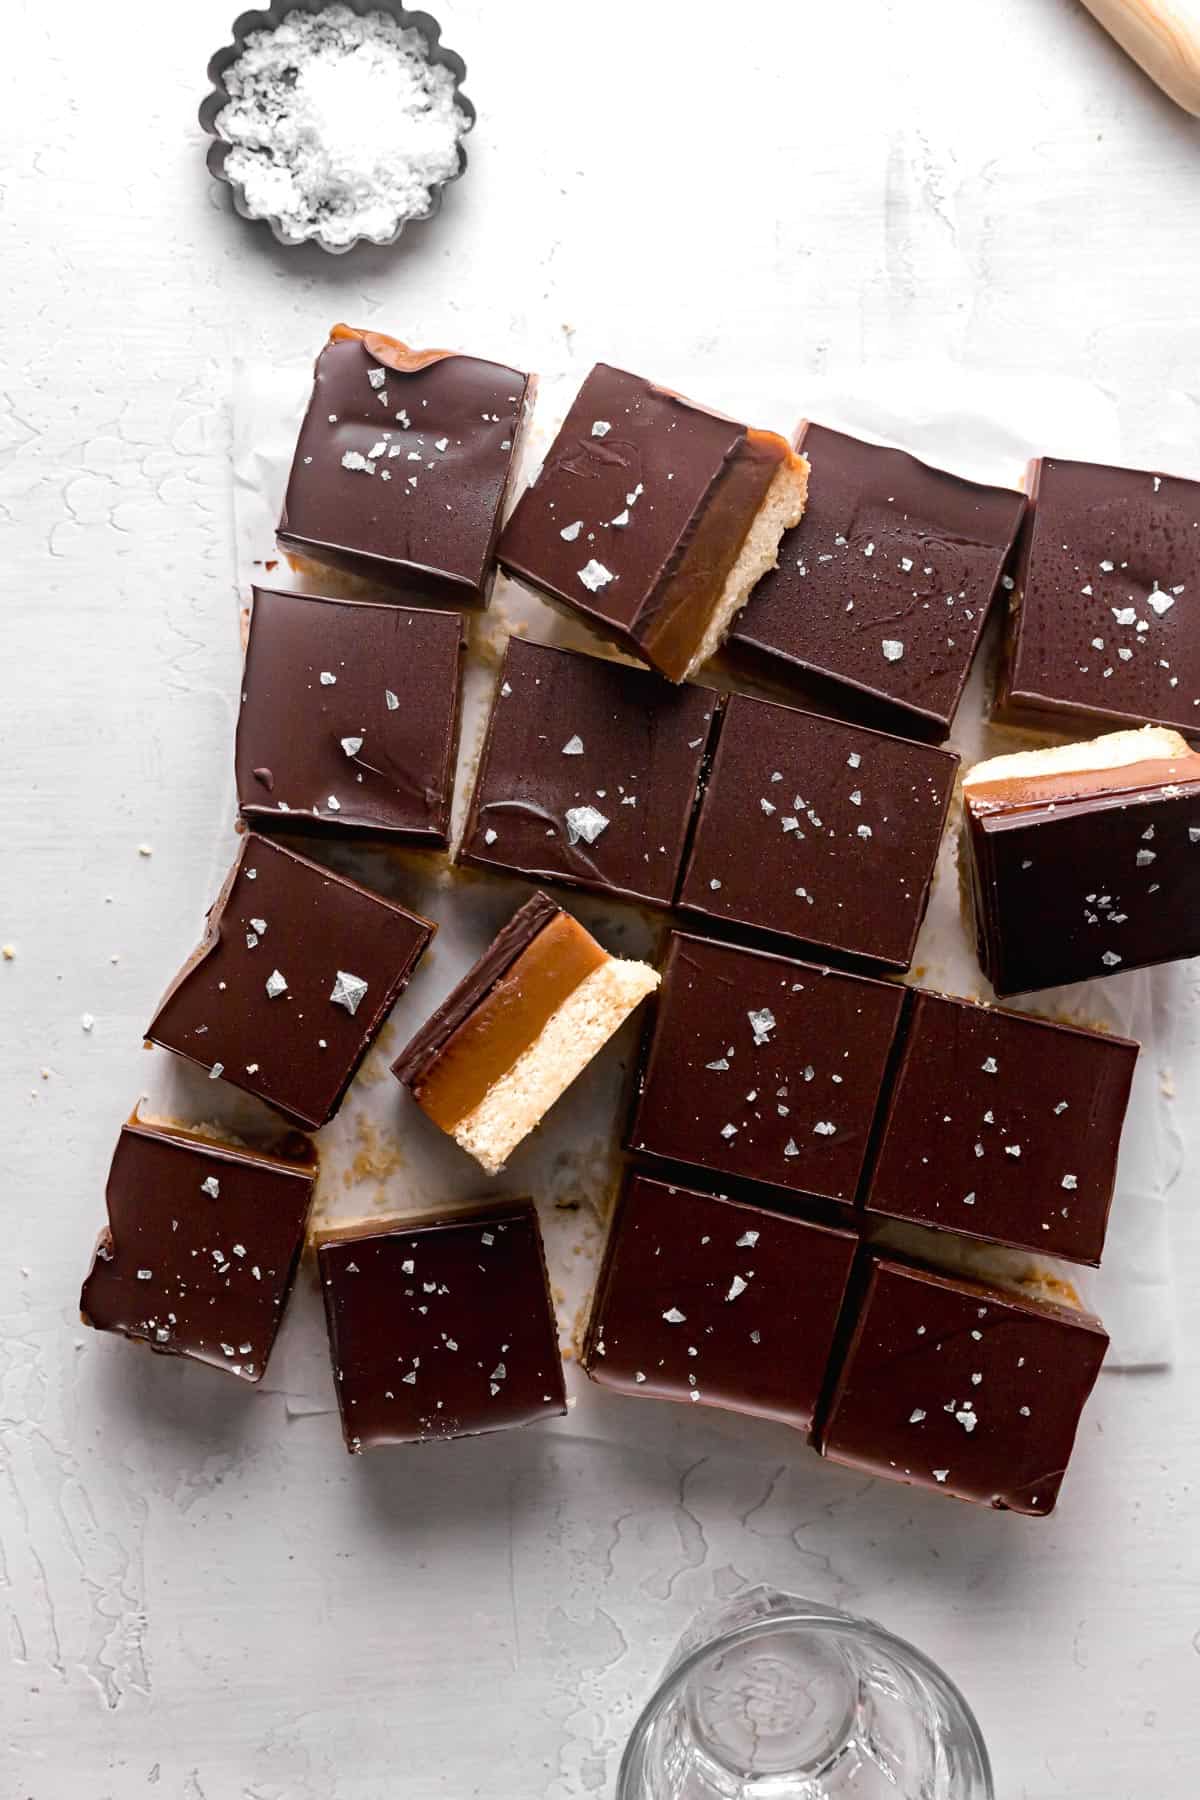 tahini caramel millionaire's shortbread cut into 16 squares with some turned on their sides.